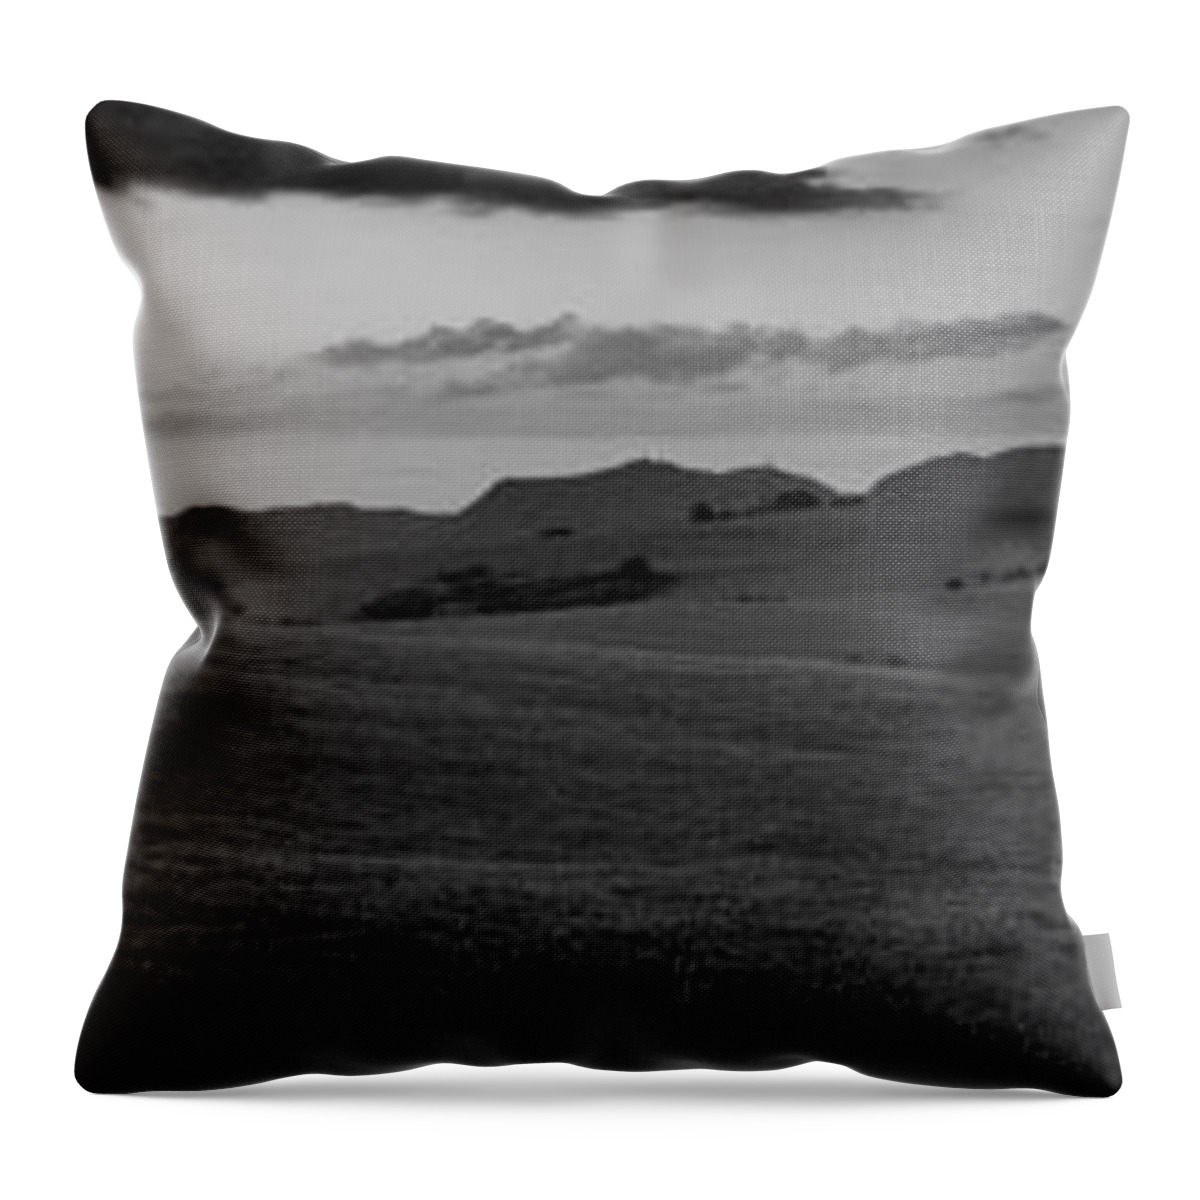 Slovakia Throw Pillow featuring the photograph Countryside #4 by Robert Grac